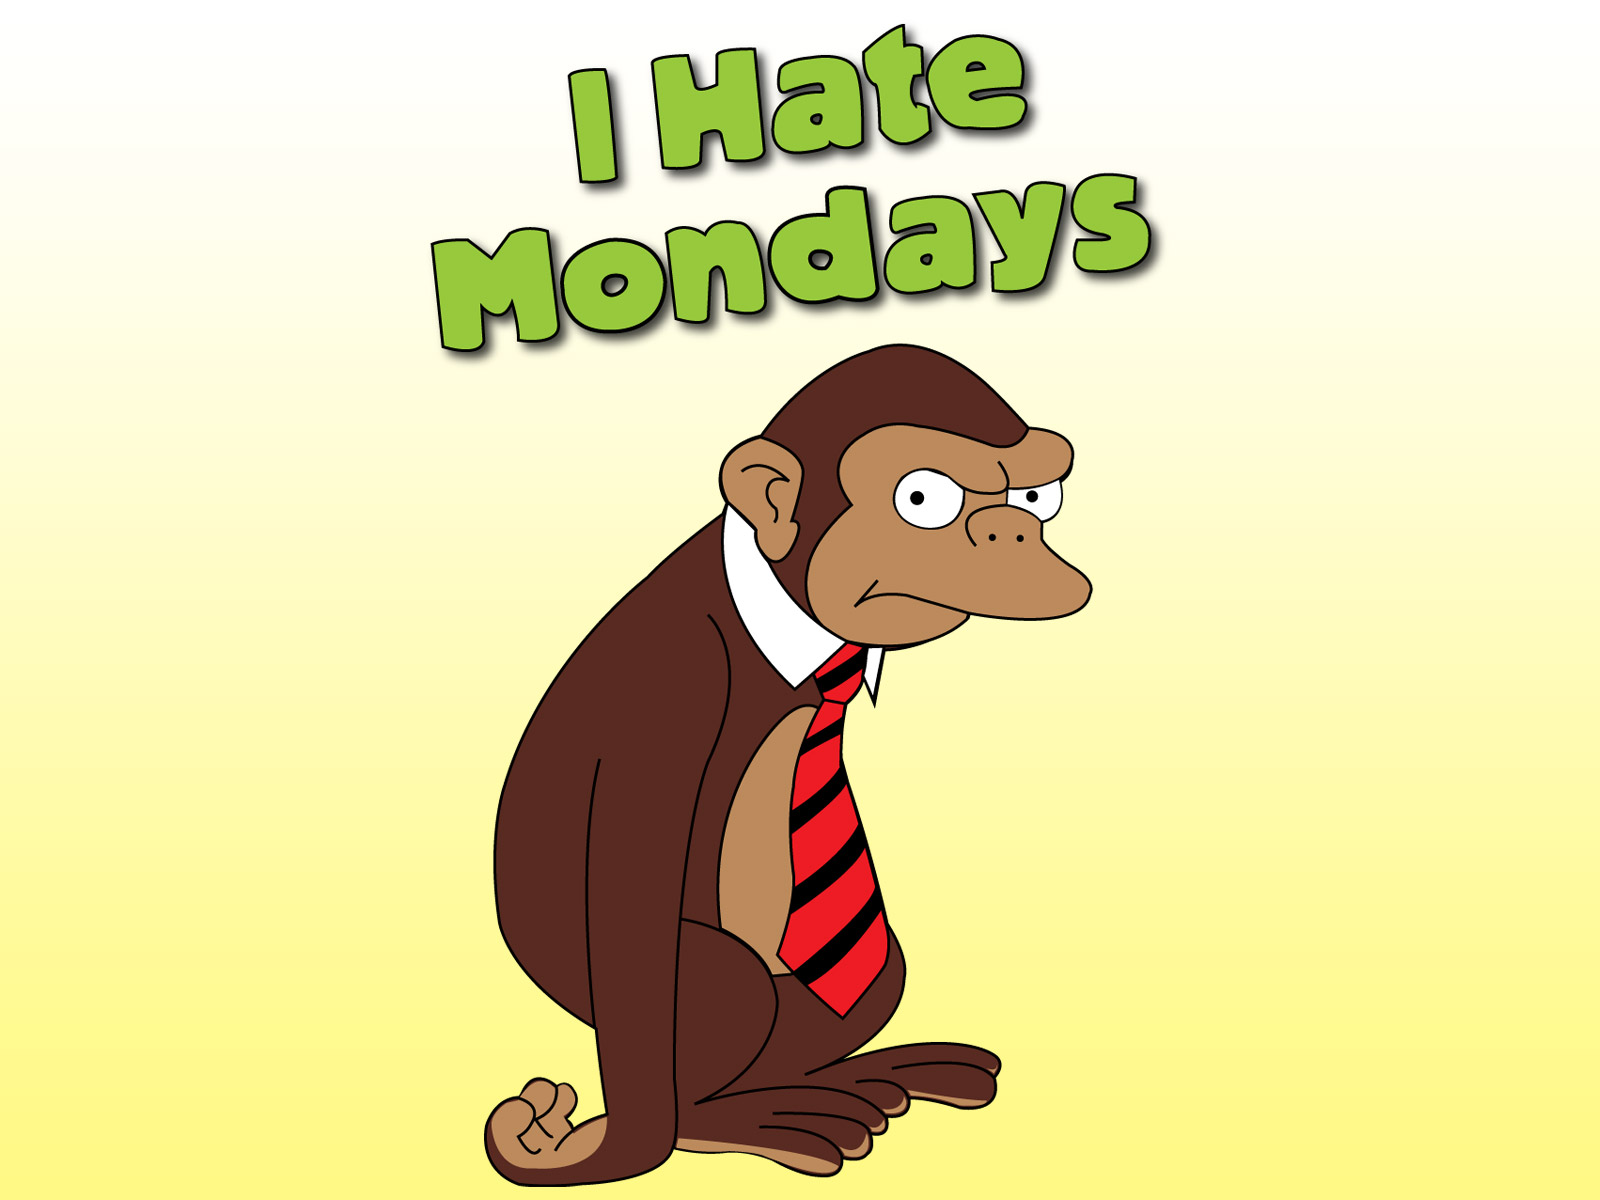 Monday Monkey Lives For The Weekends By Makavre Desktop Wallpaper